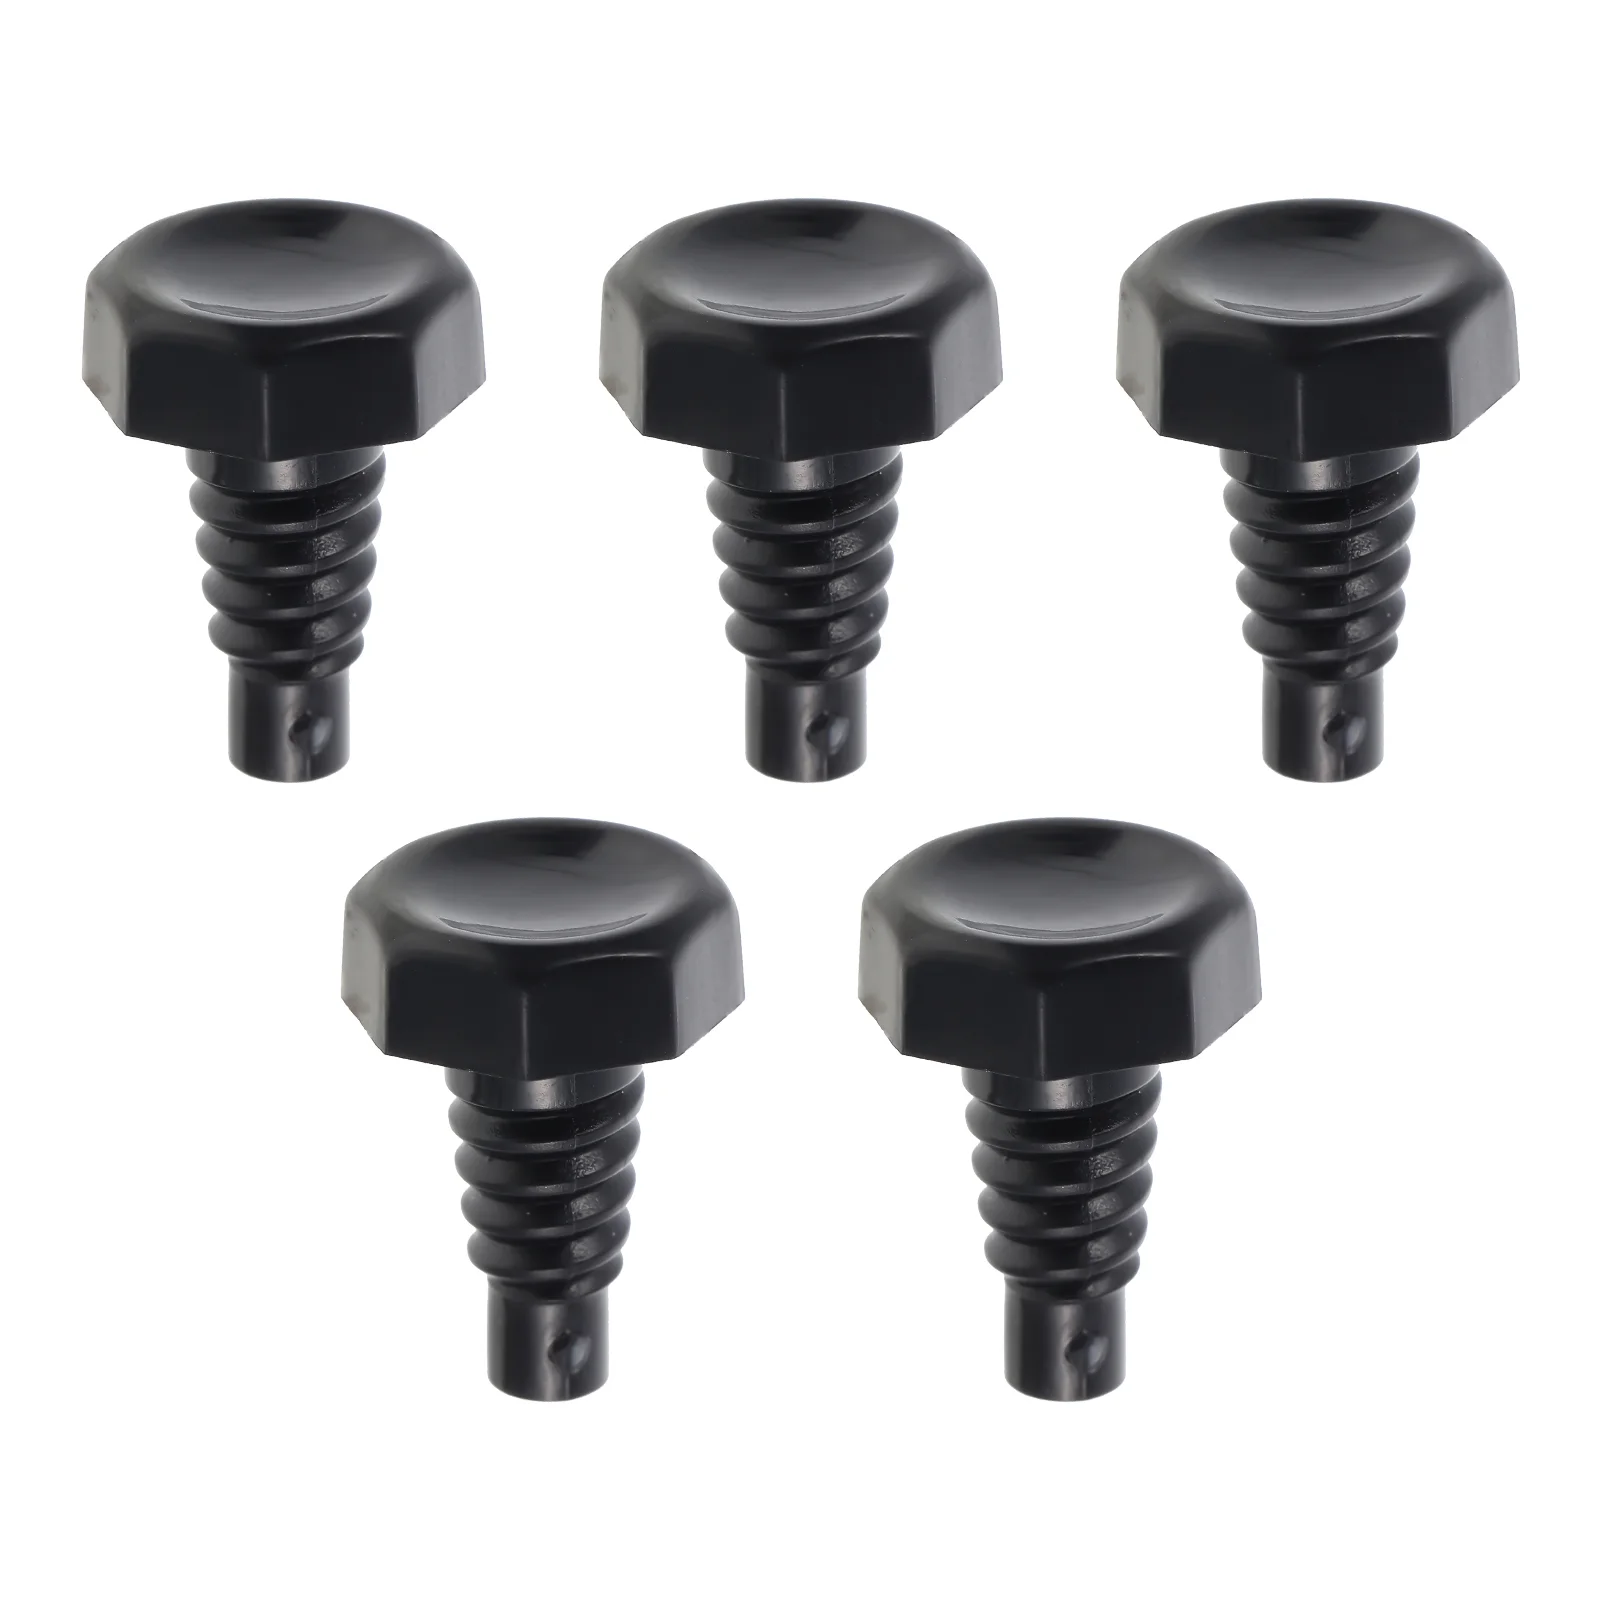 

5 Pcs Pool Cue Tail Plug Snooker Portable Cover Billiard Bottom Protector Wear-resistant Protection Plastic Dustproof